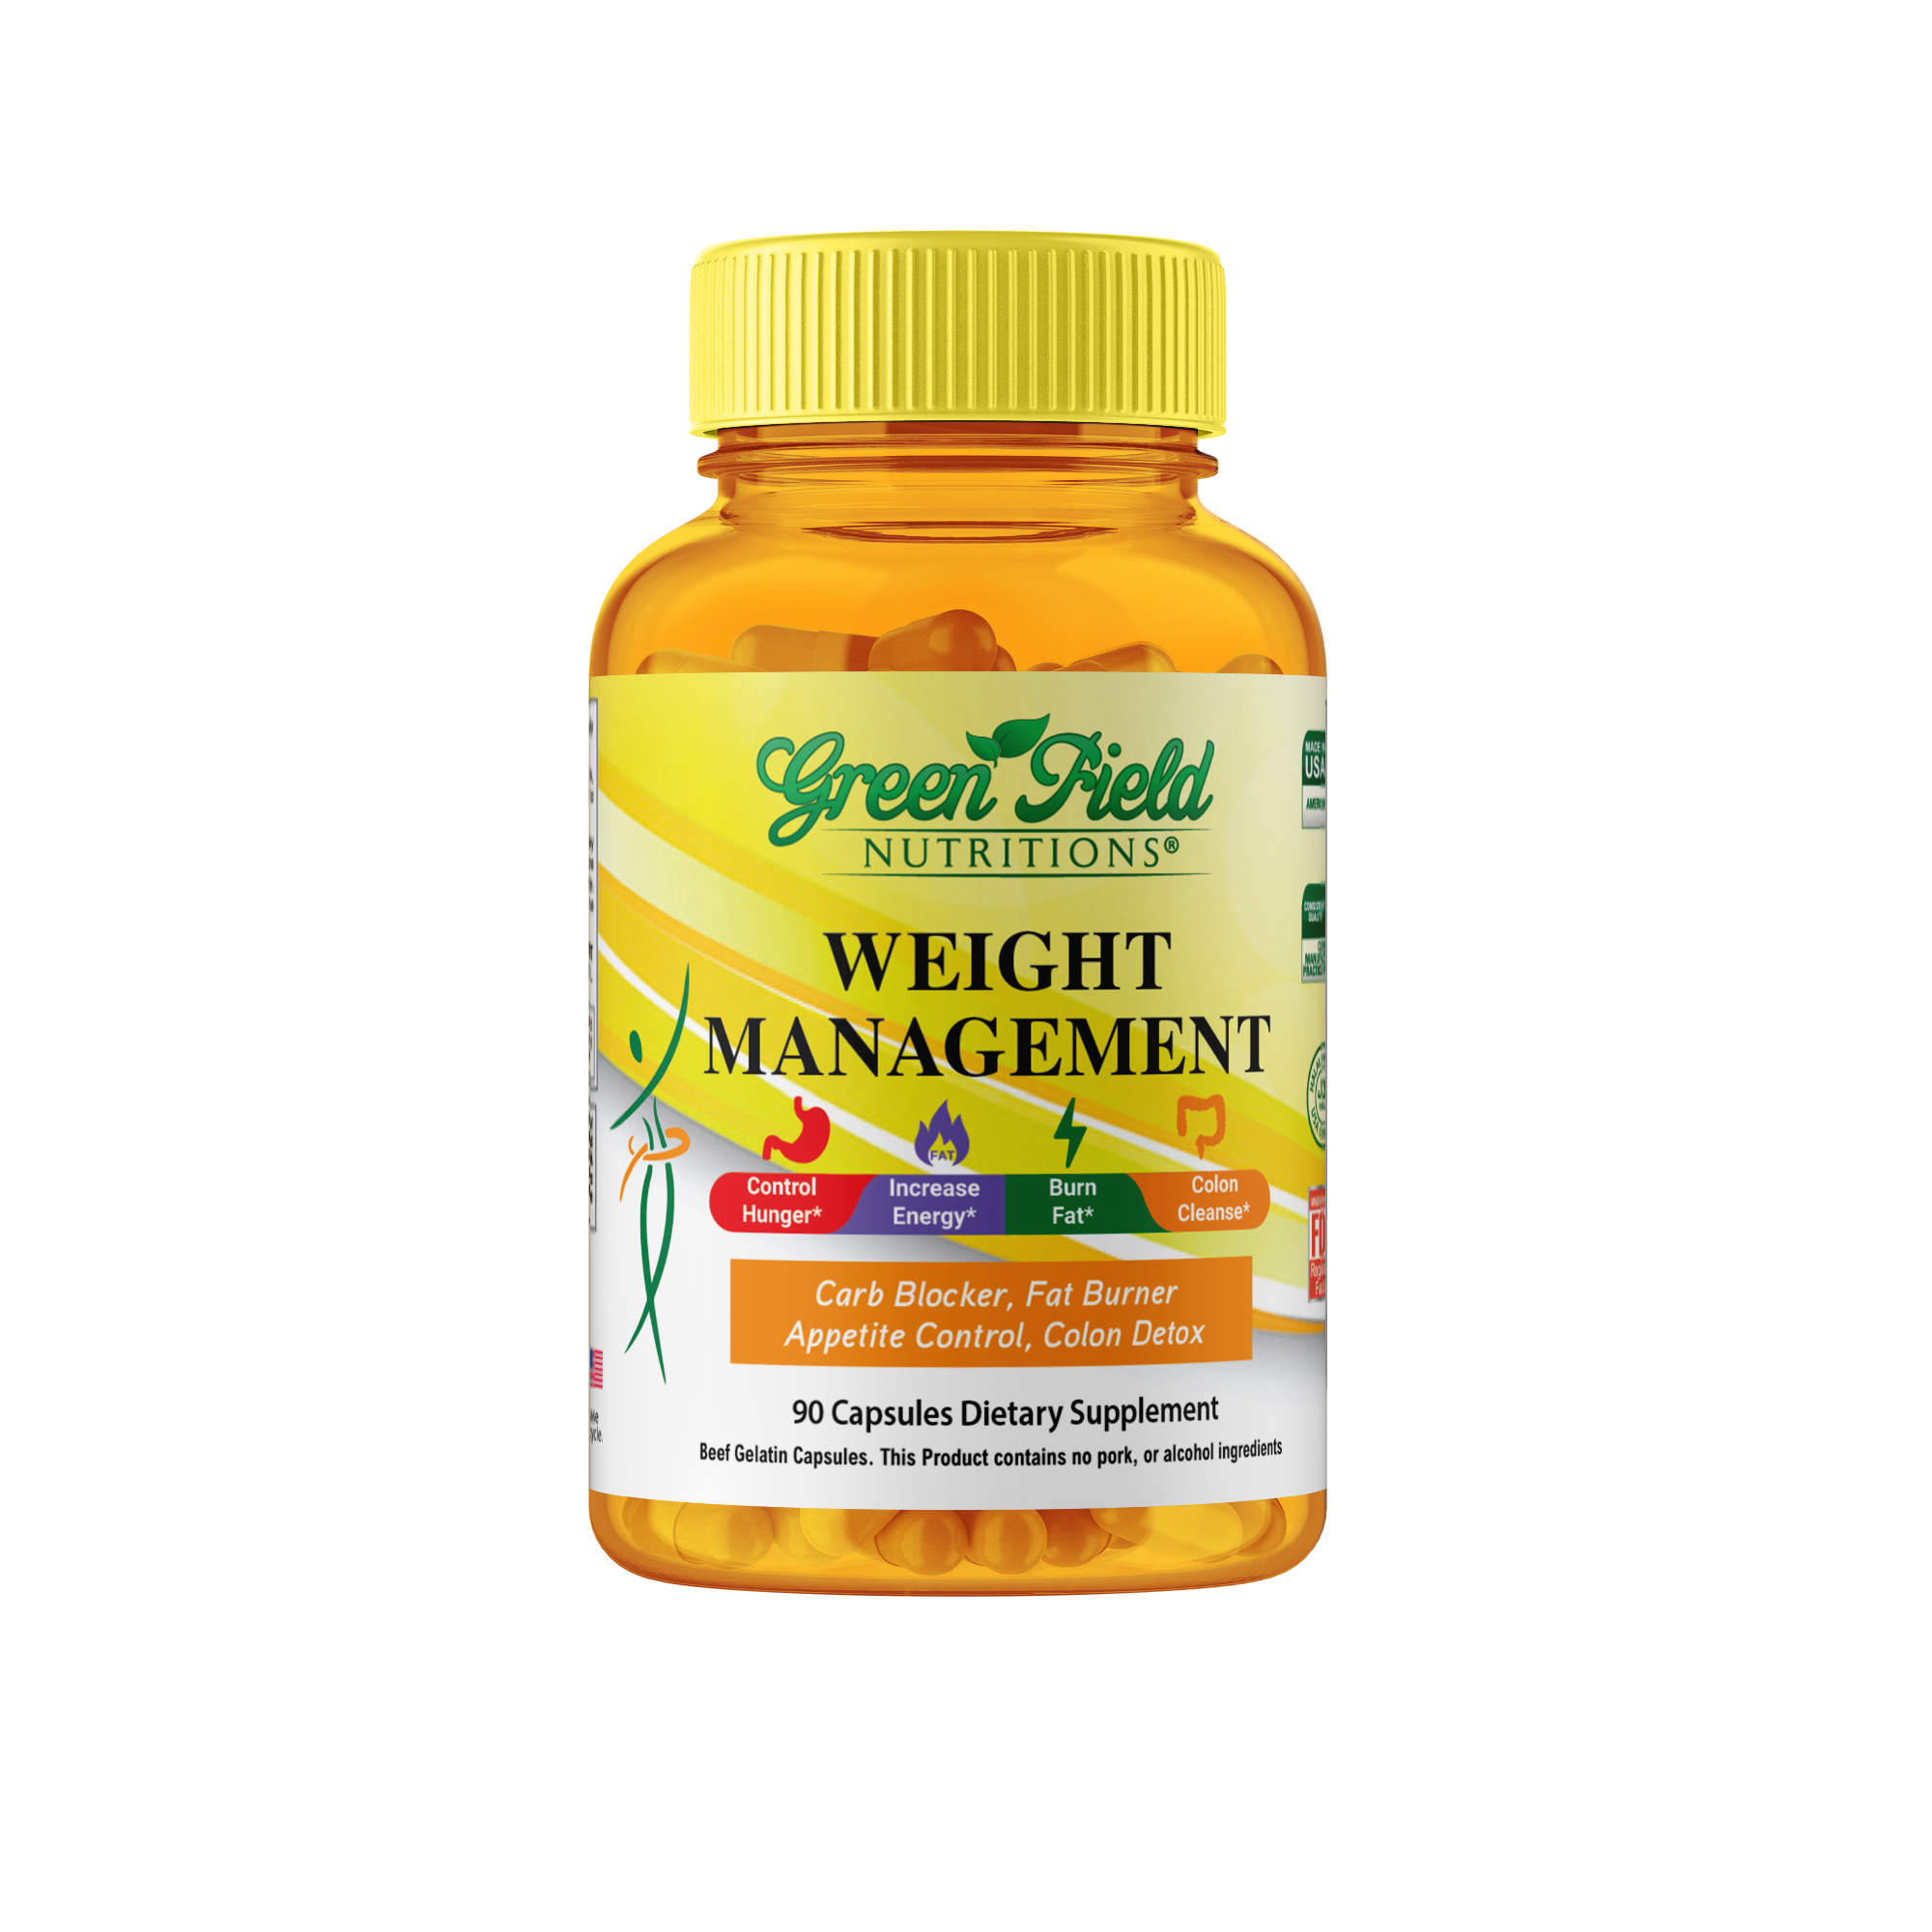 Greenfield Nutritions - Halal Weight Management Formula for Sugar Blocker, Fat Burner, Apatite Control, and Colon Cleanser